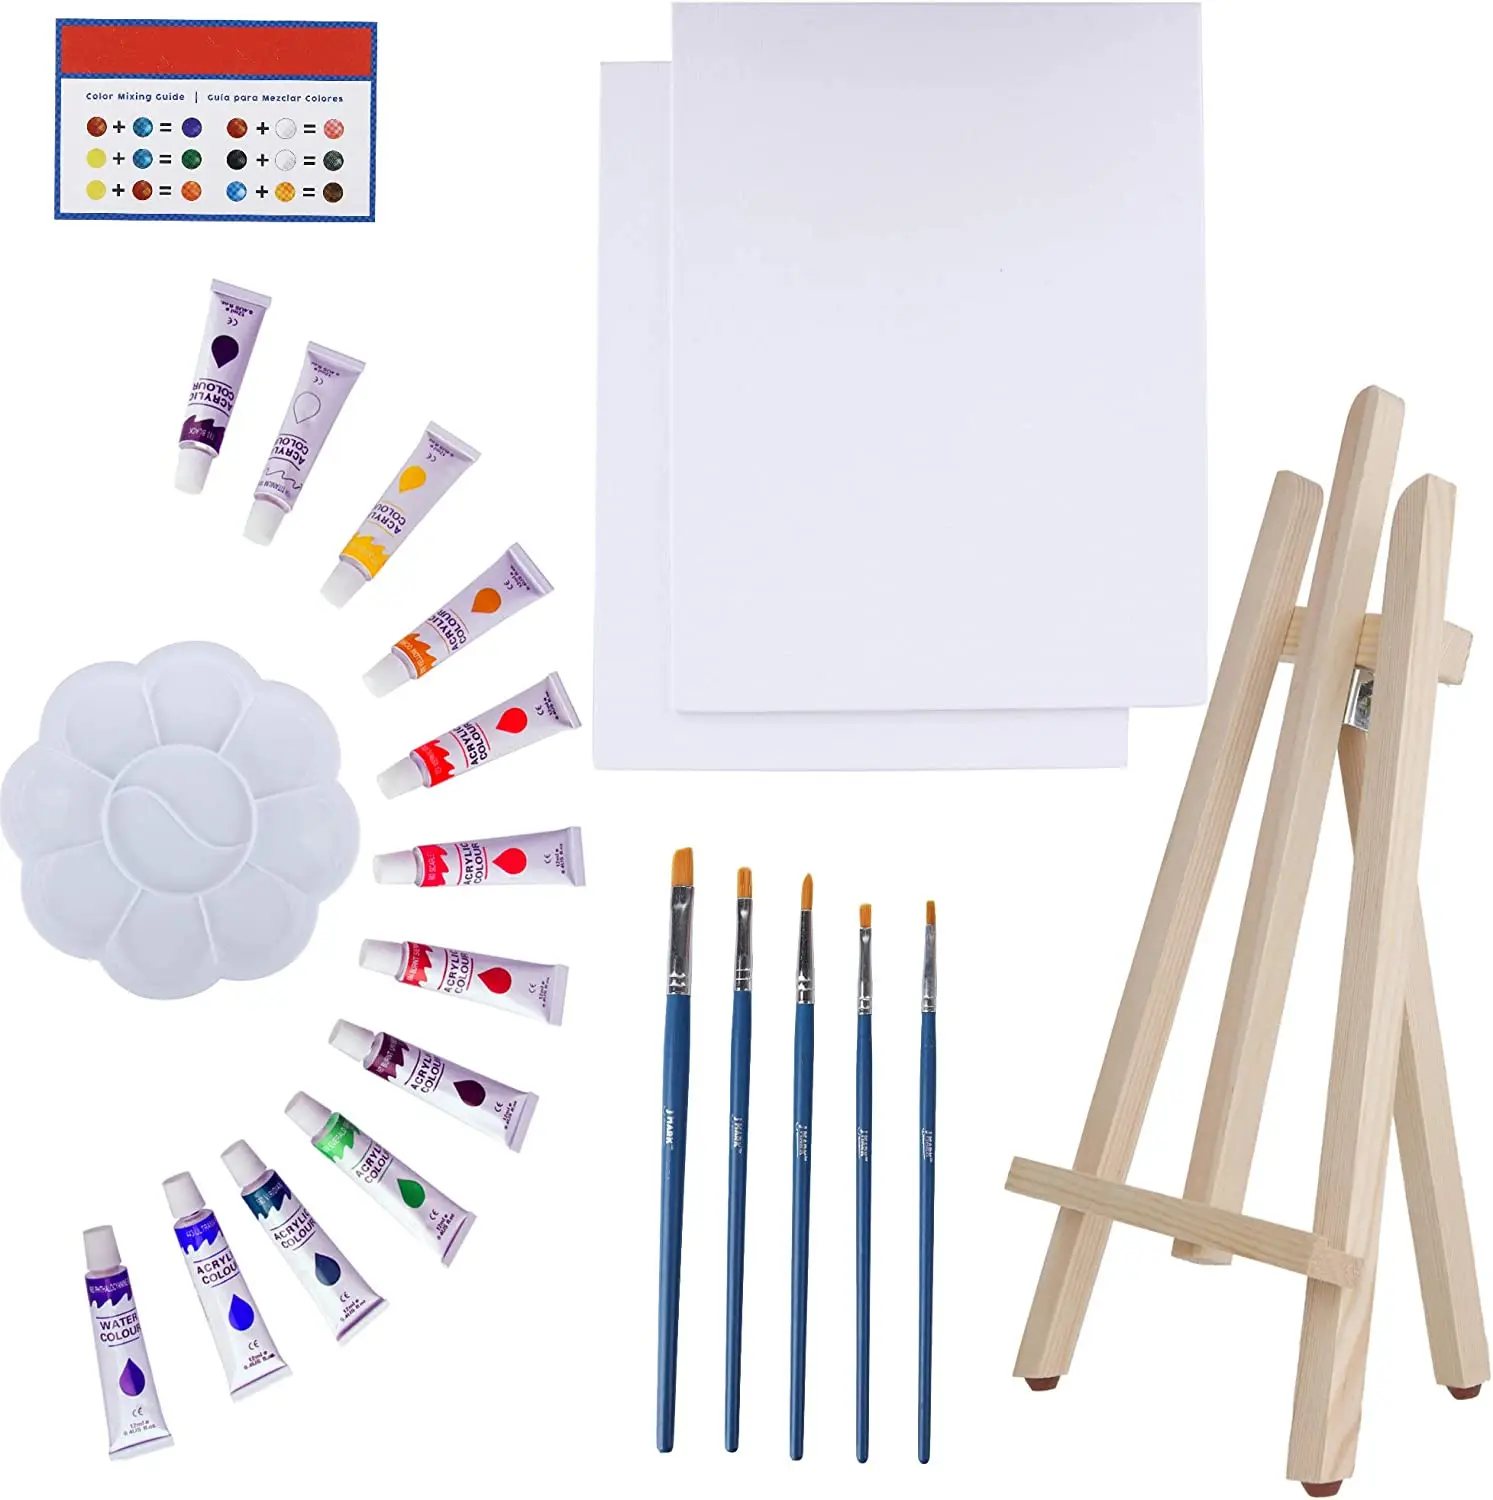 Blank Canvas painting Sets Hand made art Cotton Canvas for Painting with Acrylic Paint Canvas Art